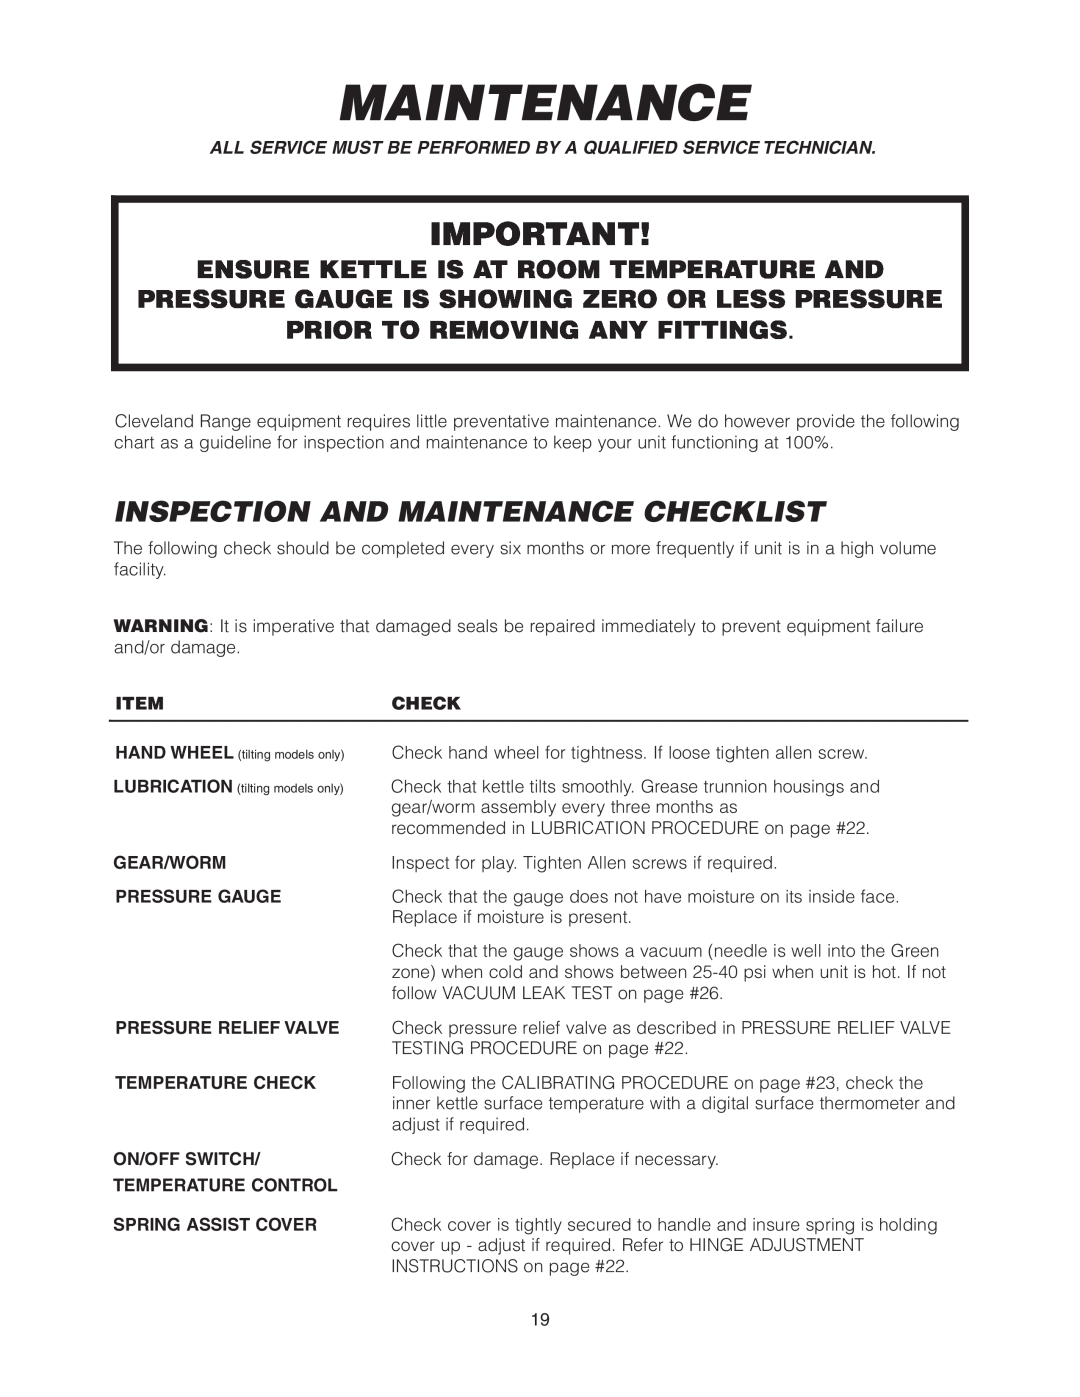 Cleveland Range KGL-25, KCL-25-T, KGT-25 Inspection And Maintenance Checklist, Ensure Kettle Is At Room Temperature And 